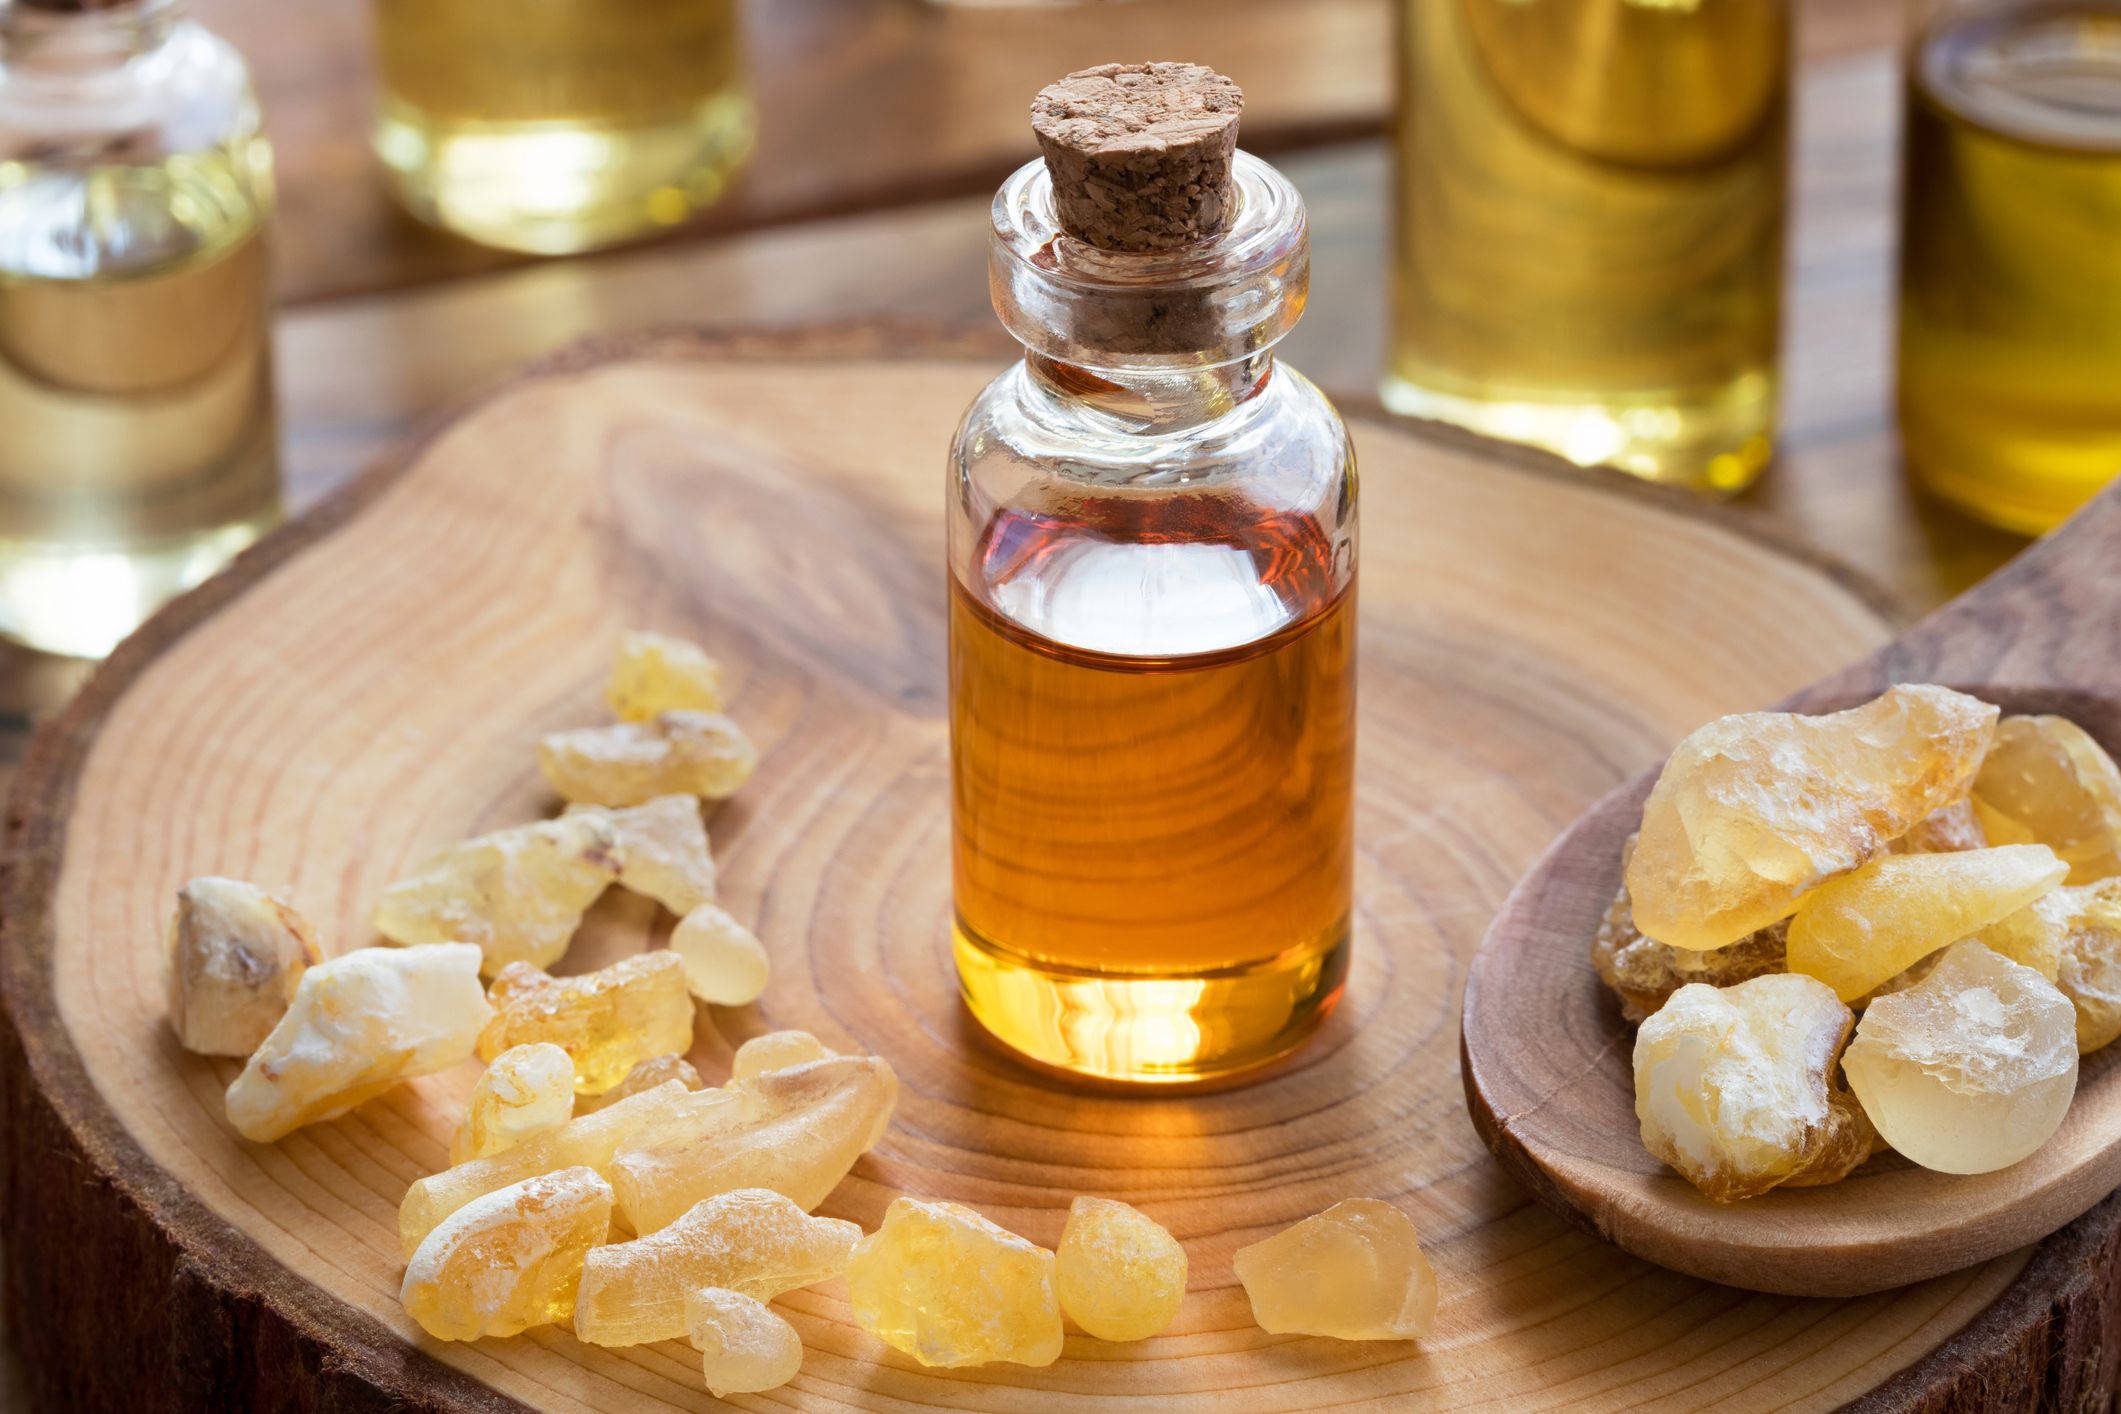 Frankincense For Skin Cancer - Learn More About The Famous King Of Oils